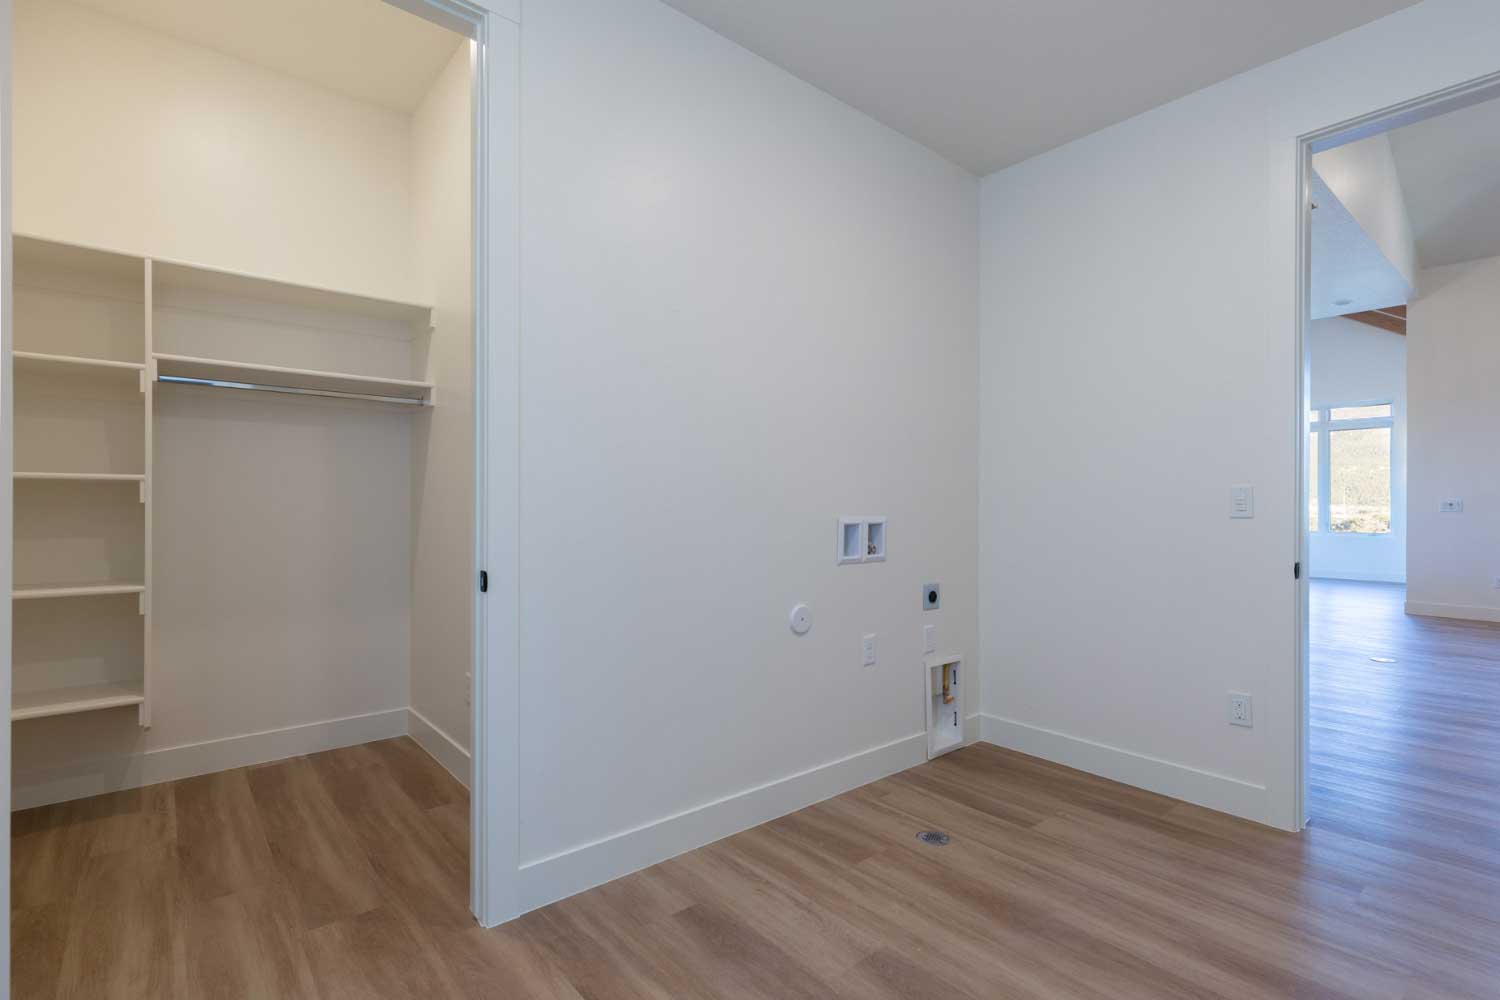 Laundry room hookups and closet with built-in shelving